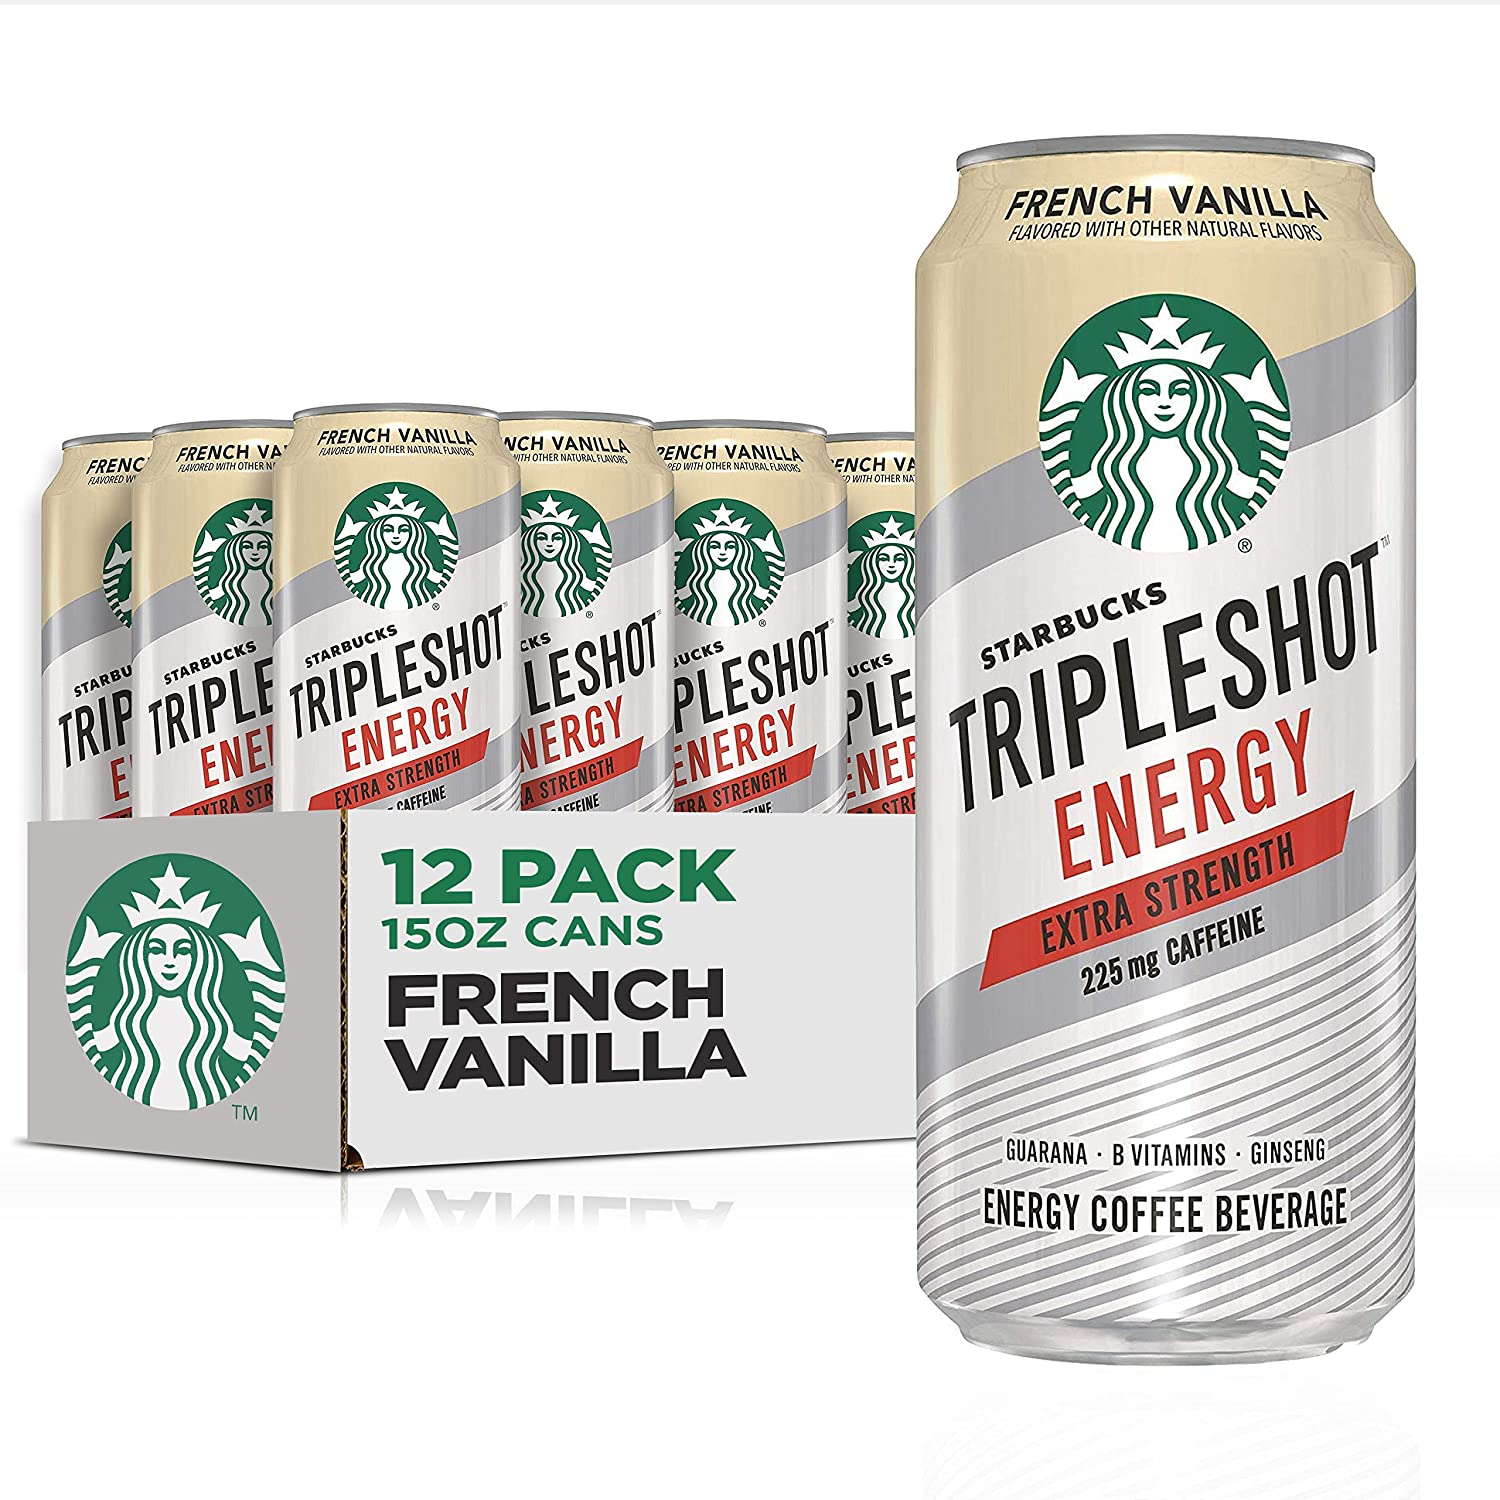 Starbucks Tripleshot Energy Extra Strength Espresso Coffee Beverage, French Vanilla,15 oz cans 12 Pack